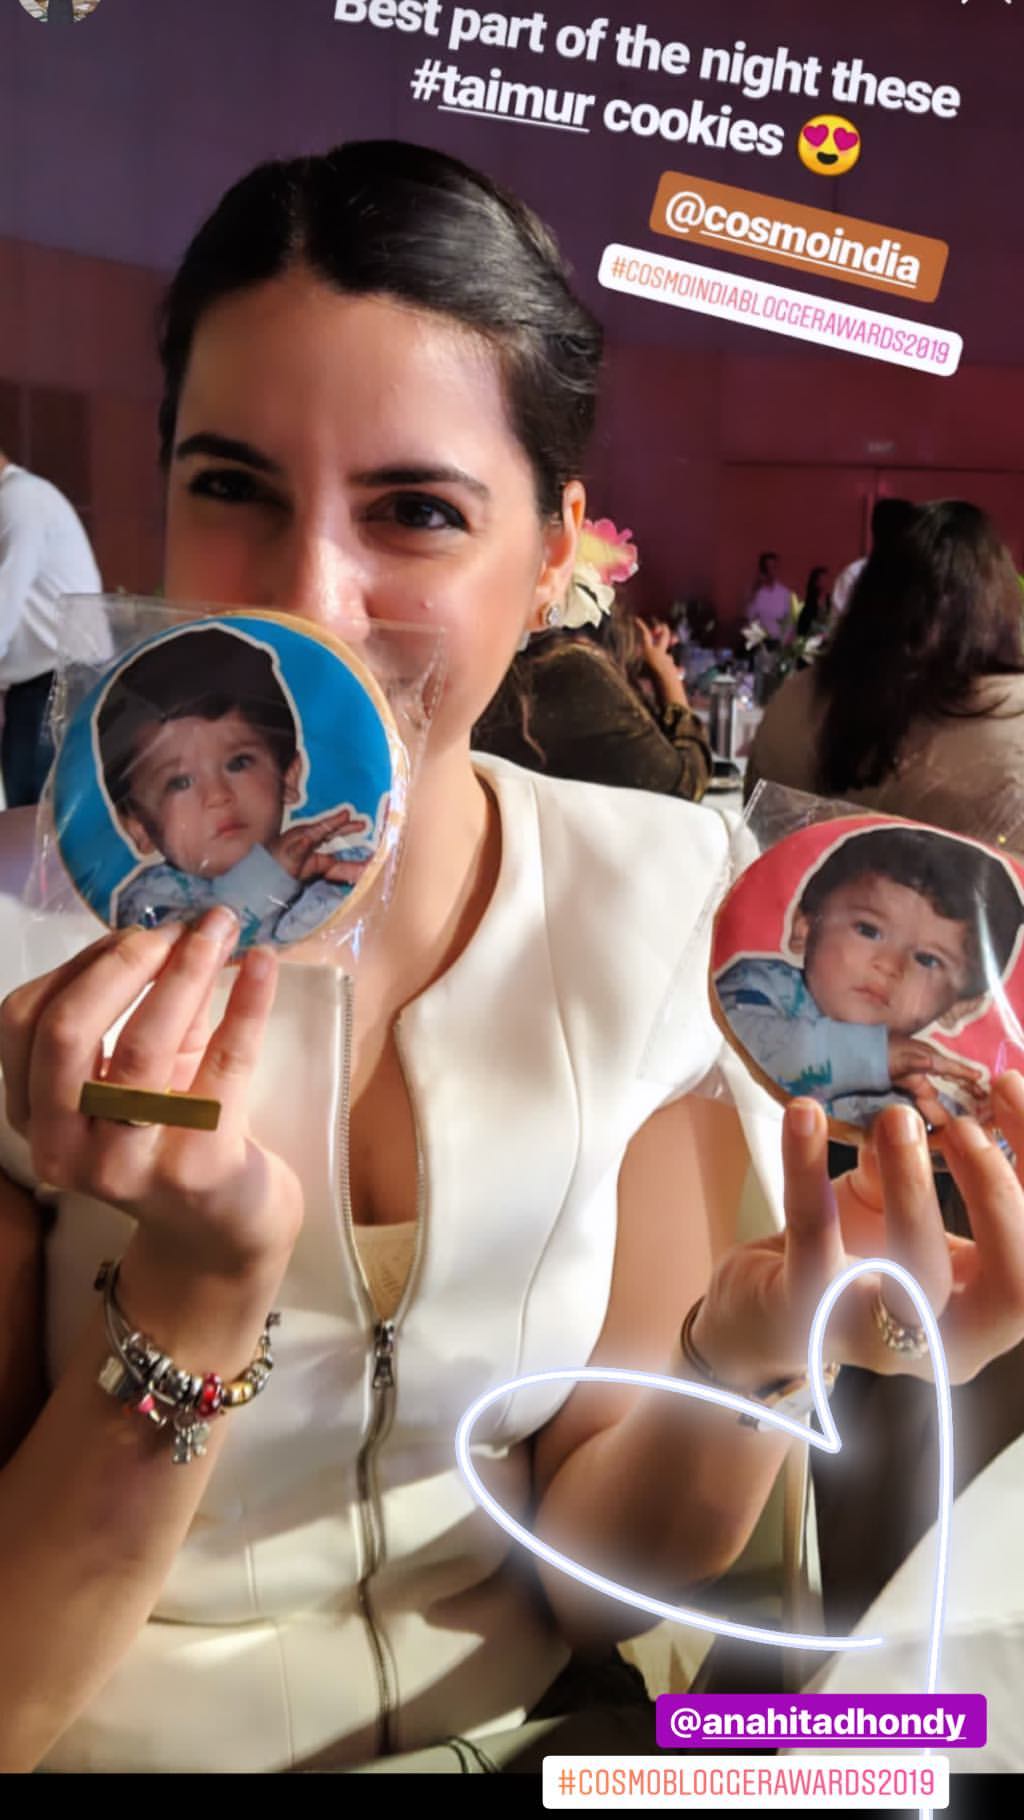 The new viral Taimur-cookies are not edible? Here's the whole story behind!